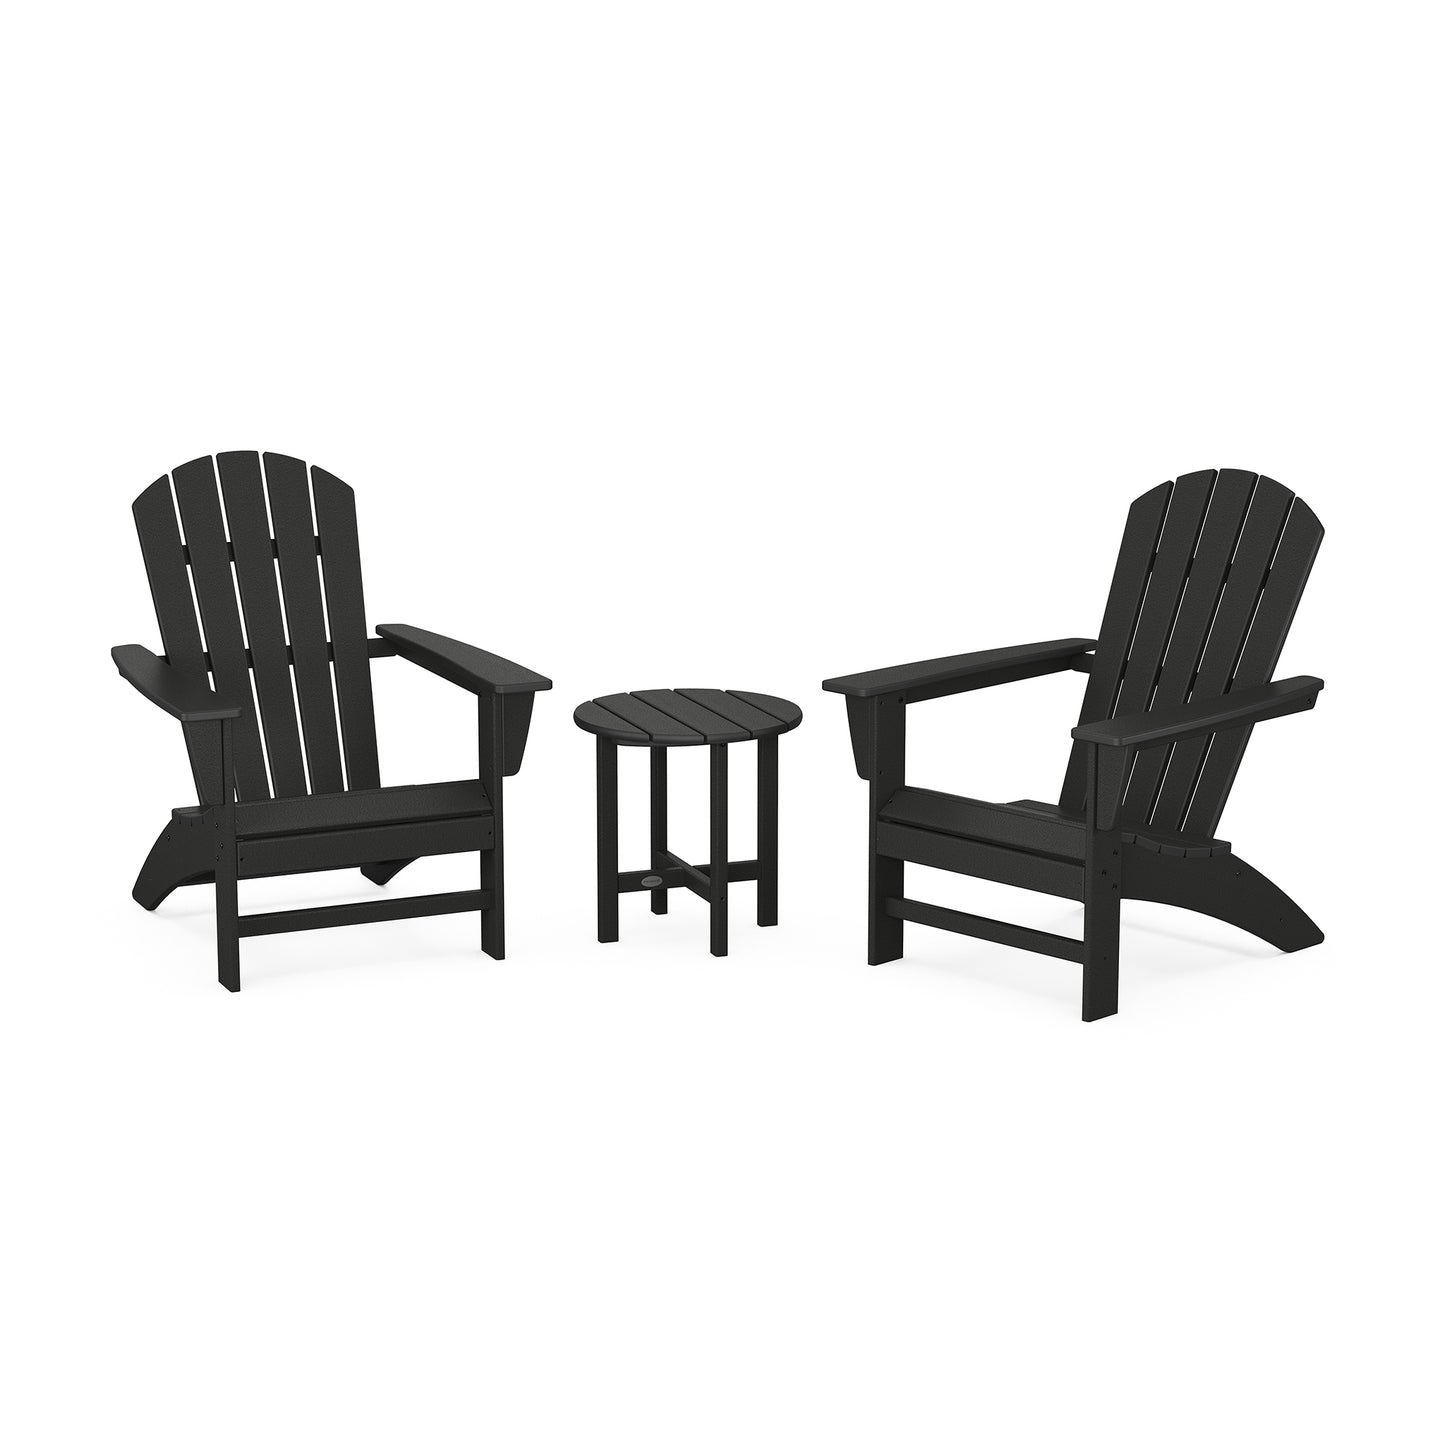 Two black POLYWOOD Nautical 3-Piece Adirondack Sets facing each other with a small round table between them, set against a plain white background.